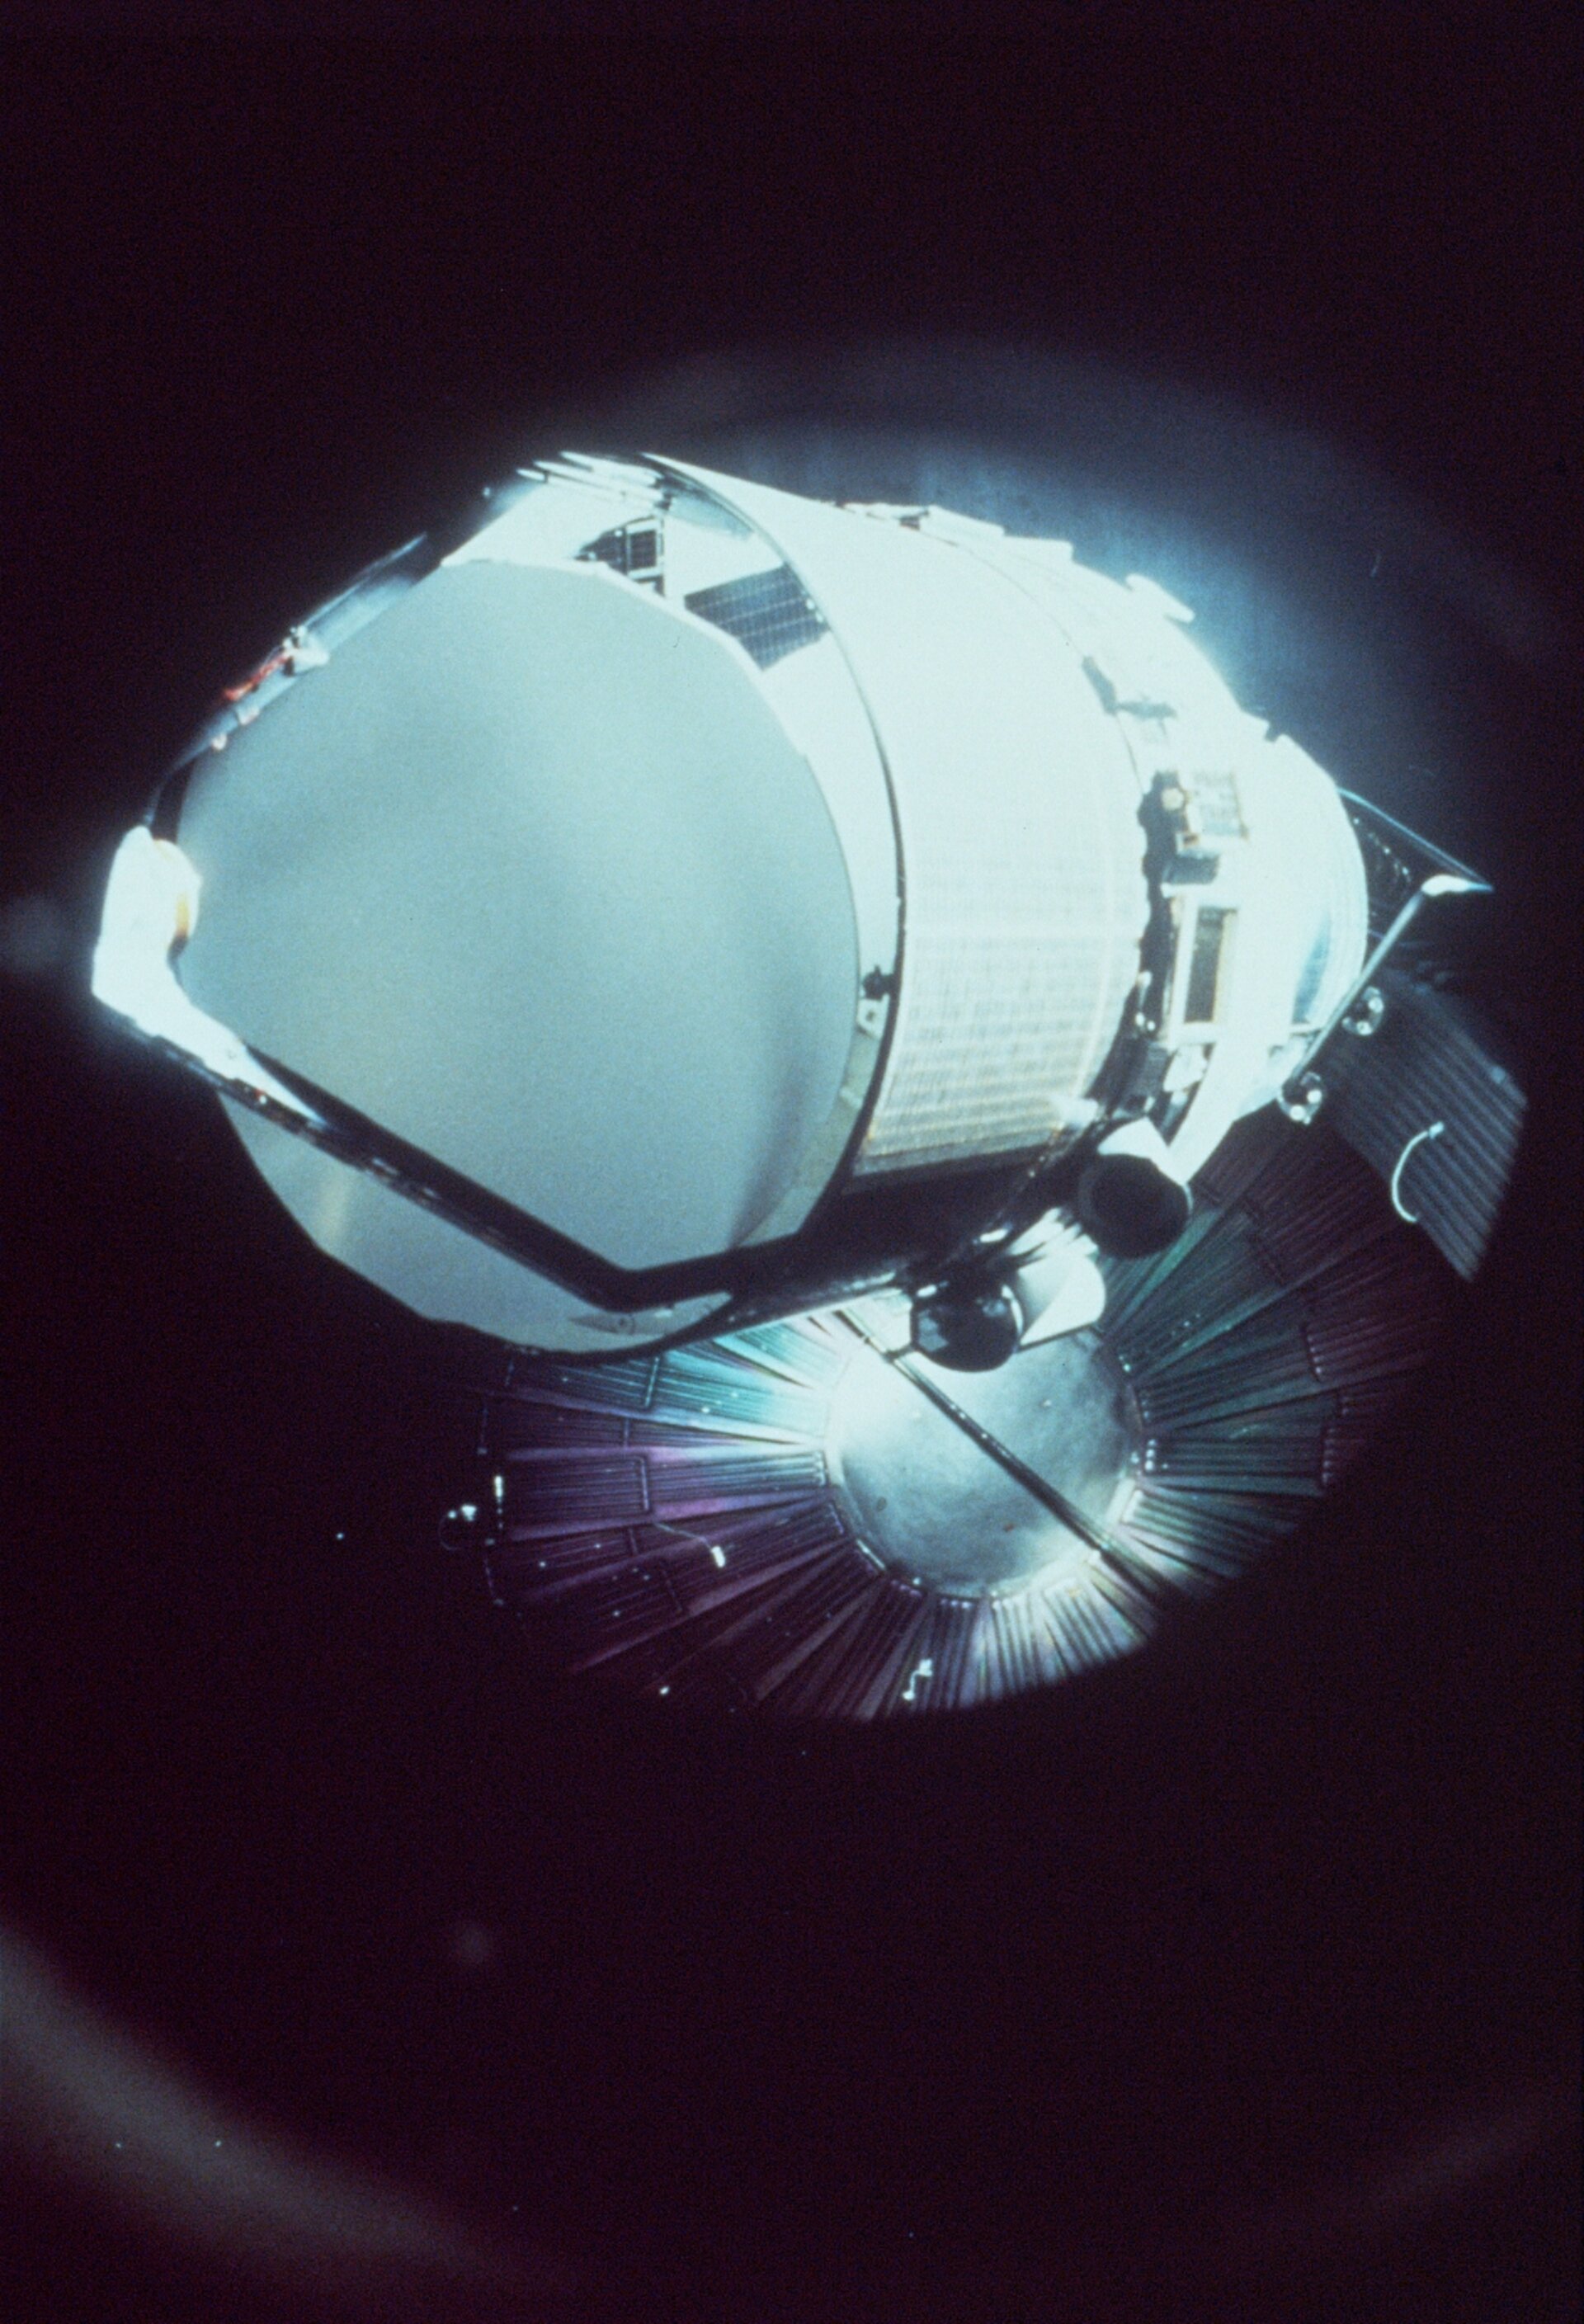 Giotto spacecraft during the solar simulation test